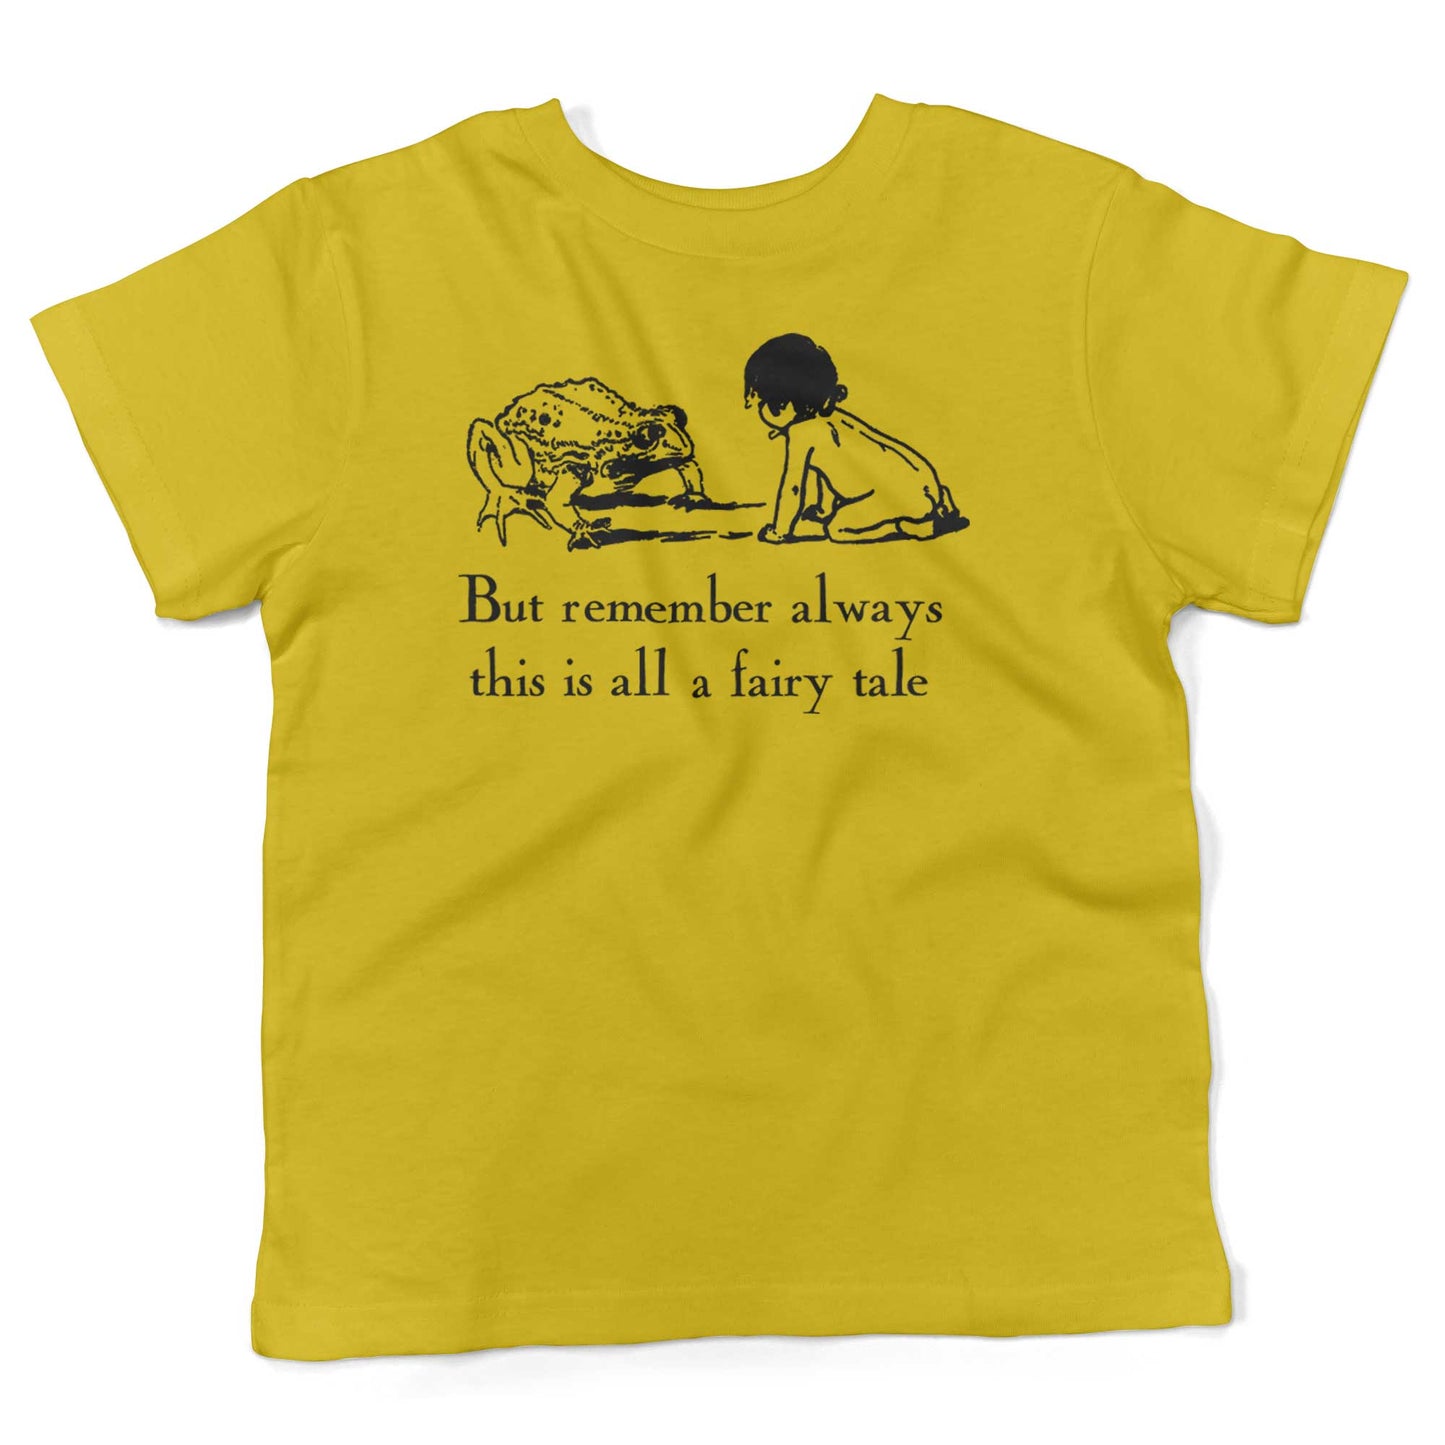 But remember always this is all a fairy tale Toddler Shirt-Sunshine Yellow-2T